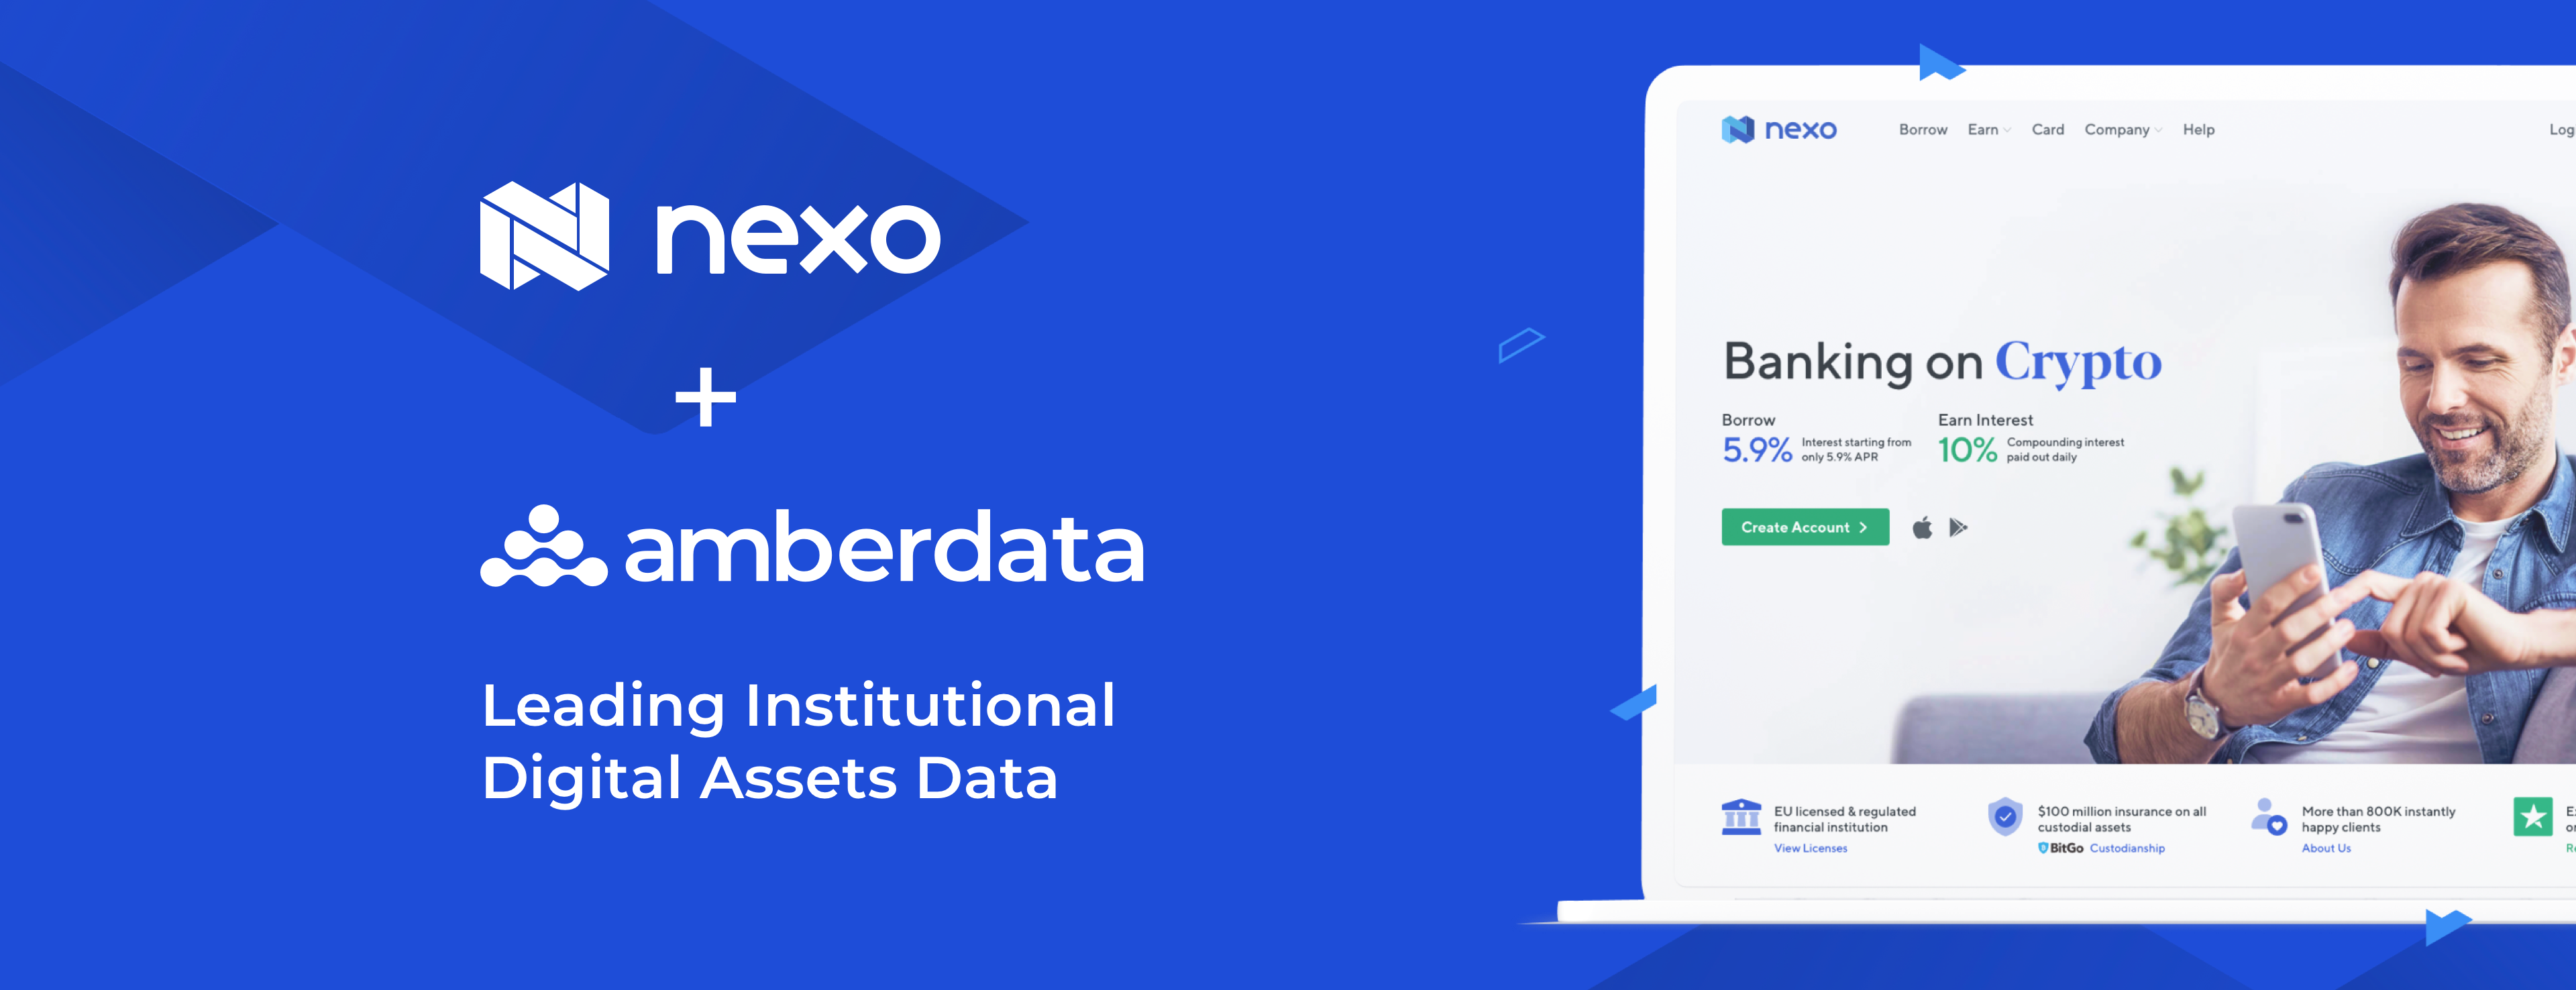 Nexo and Amberdata Partner to Enhance Institutional Digital Assets Markets and Insights